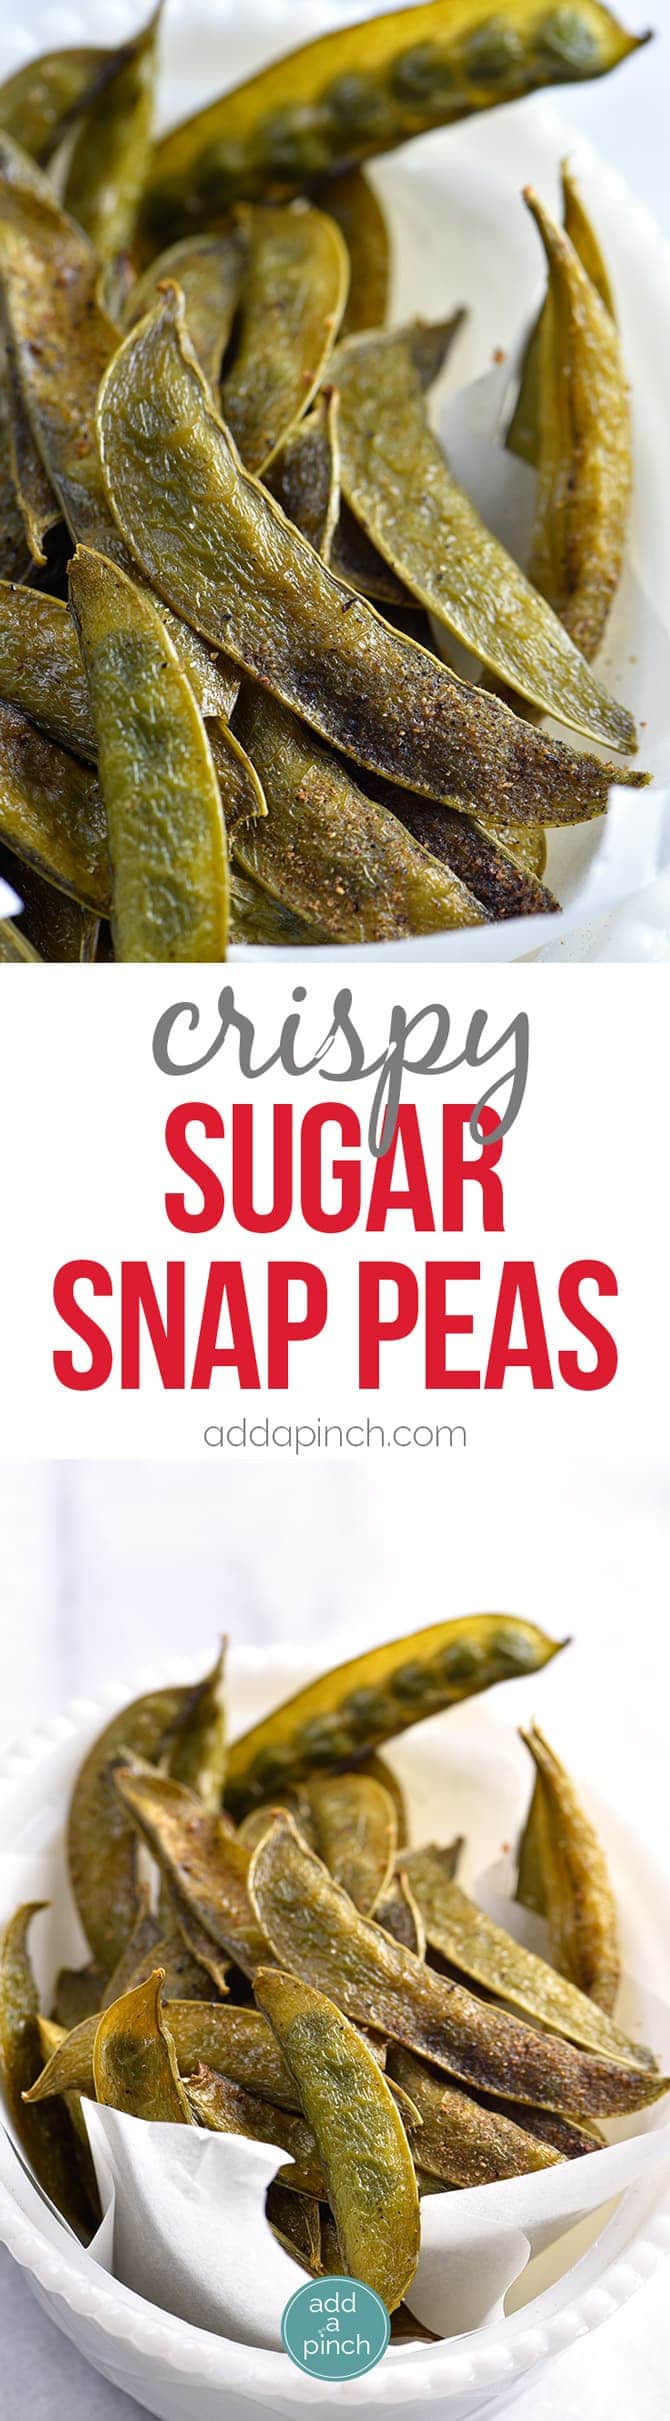 Crispy Sugar Snap Peas Recipe - These crispy sugar snap peas will quickly become a favorite snack! Ready in minutes! Multiple seasoning options included! // addapinch.com